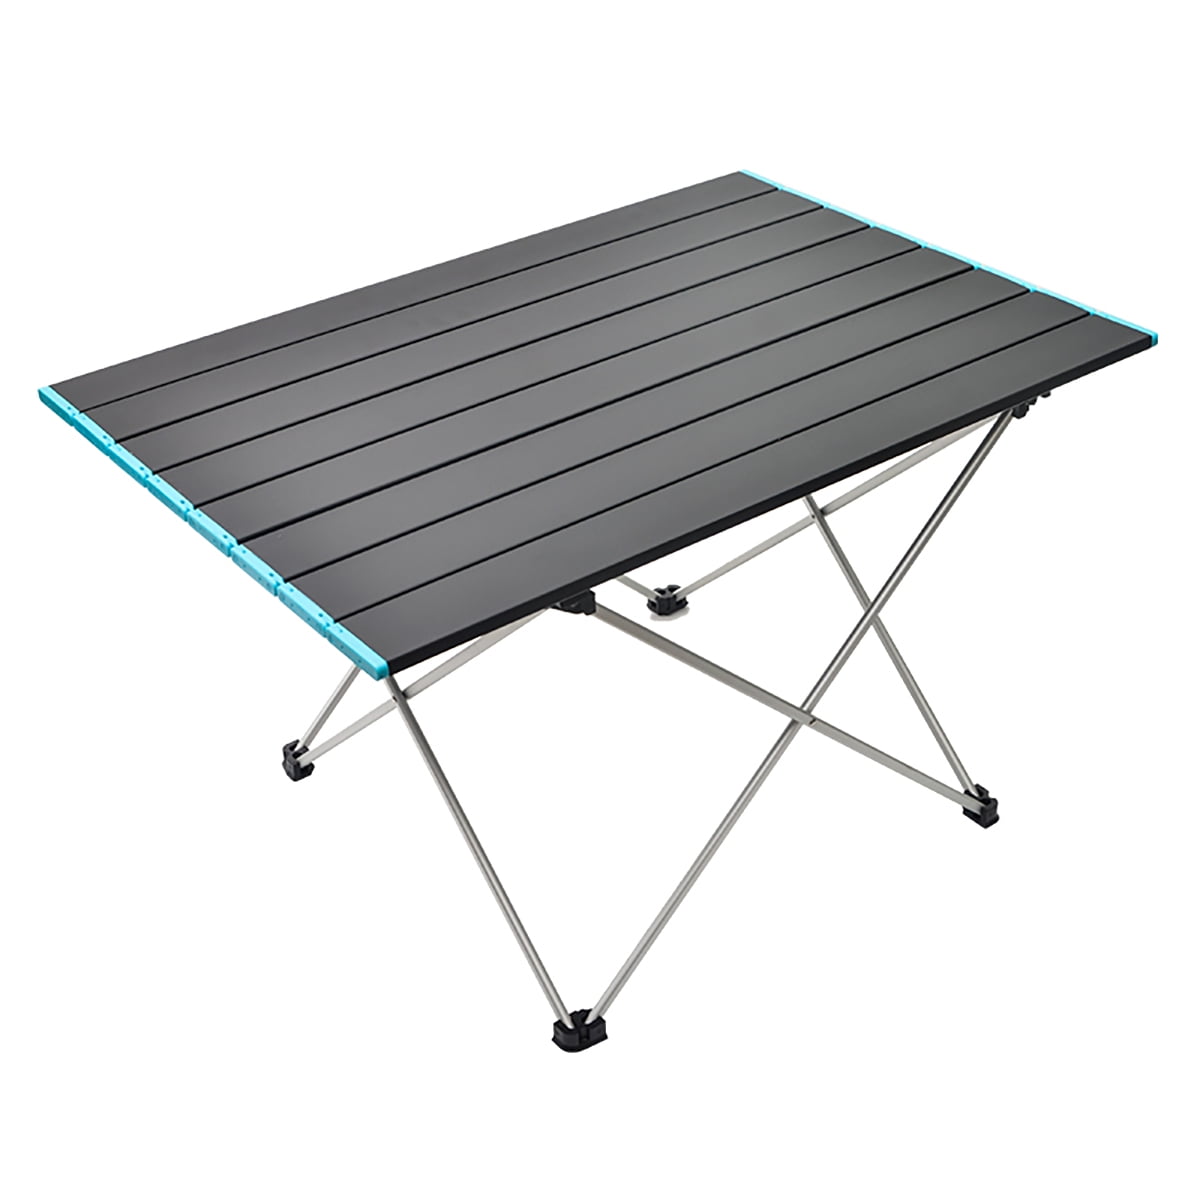 Portable Outdoor Folding Camping Table Patio BBQ Picnic Table Lightweight UK 